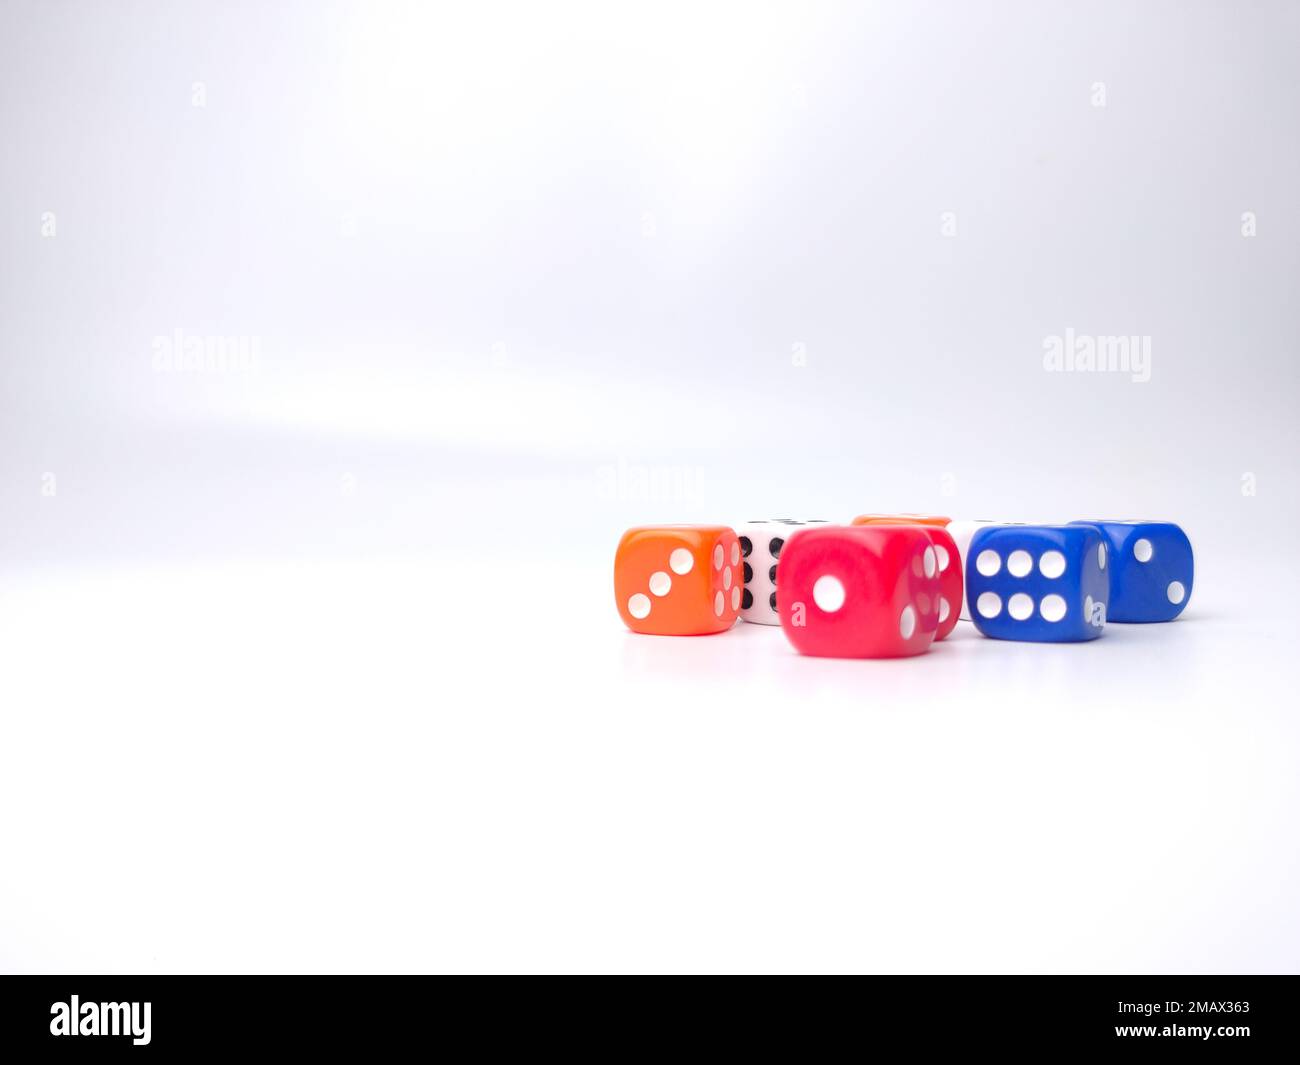 Colored dice isolated on a white background Stock Photo